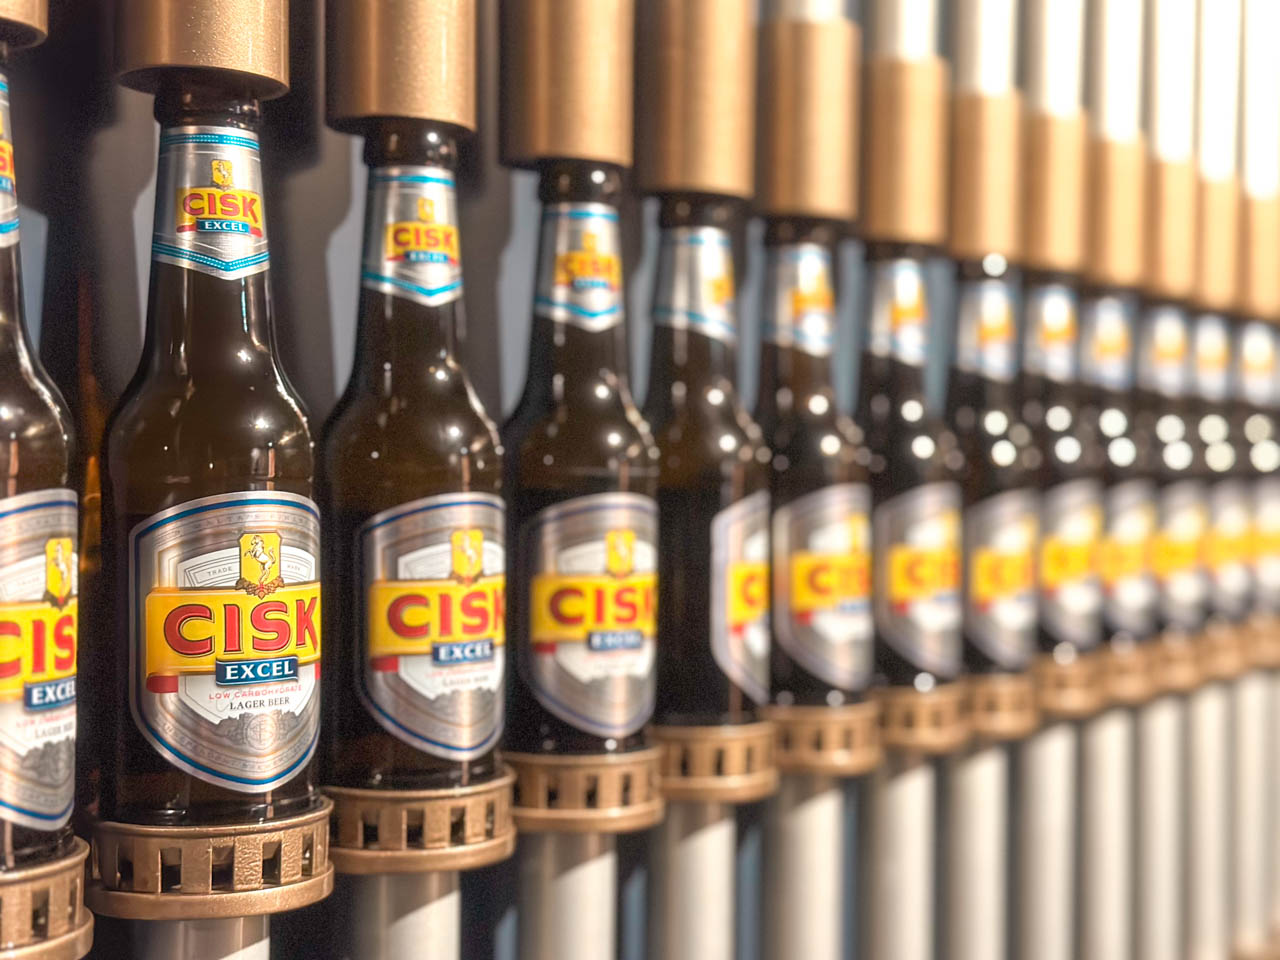 A row of Cisk beer bottles on display at the Farsons Brewery Experience in Malta